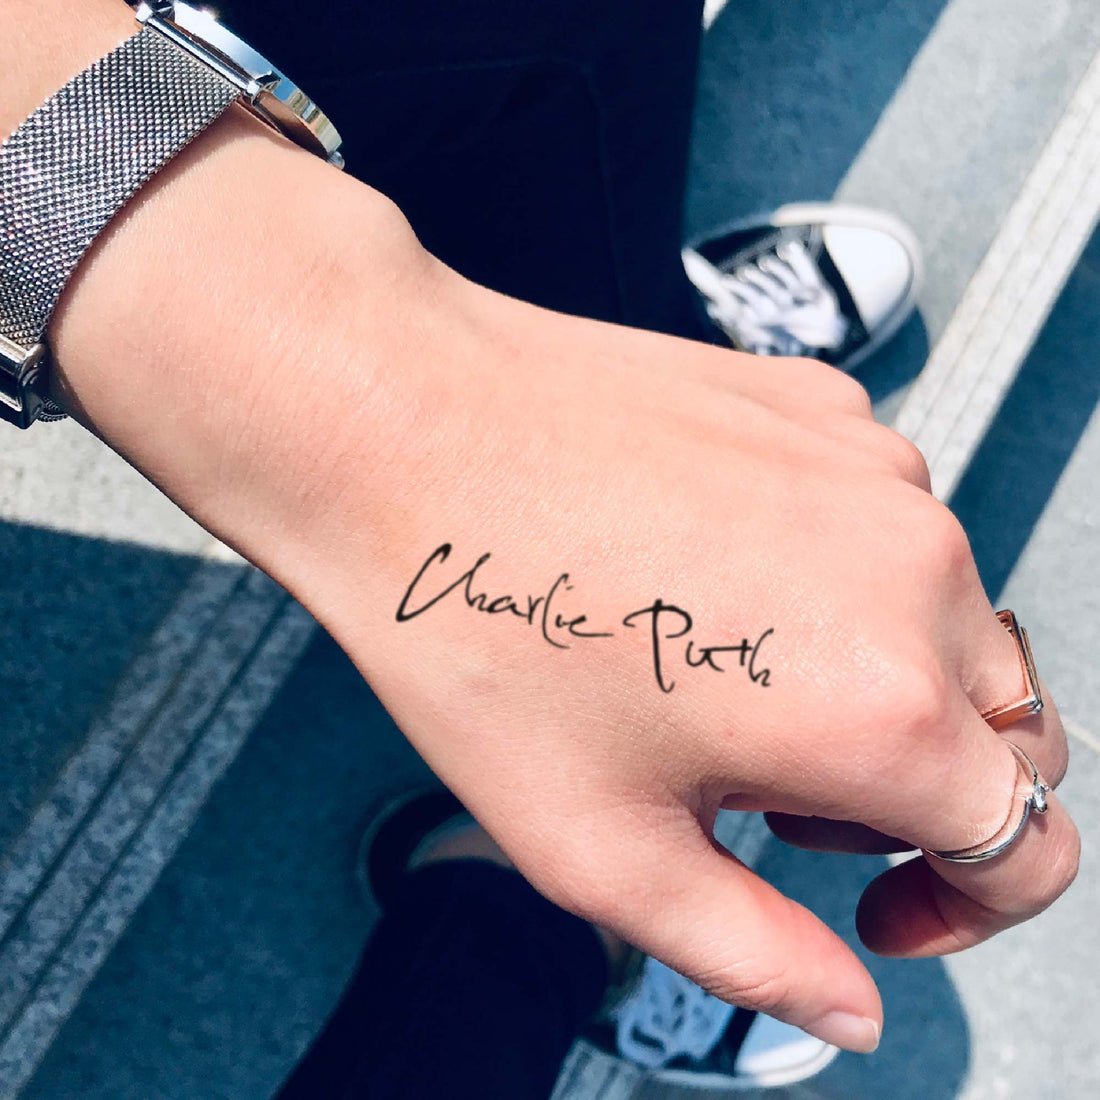 Charlie Puth custom temporary tattoo sticker design idea inspiration meanings removal arm wrist hand words font name signature calligraphy lyrics tour concert outfits merch accessory gift souvenir costumes wear dress up code